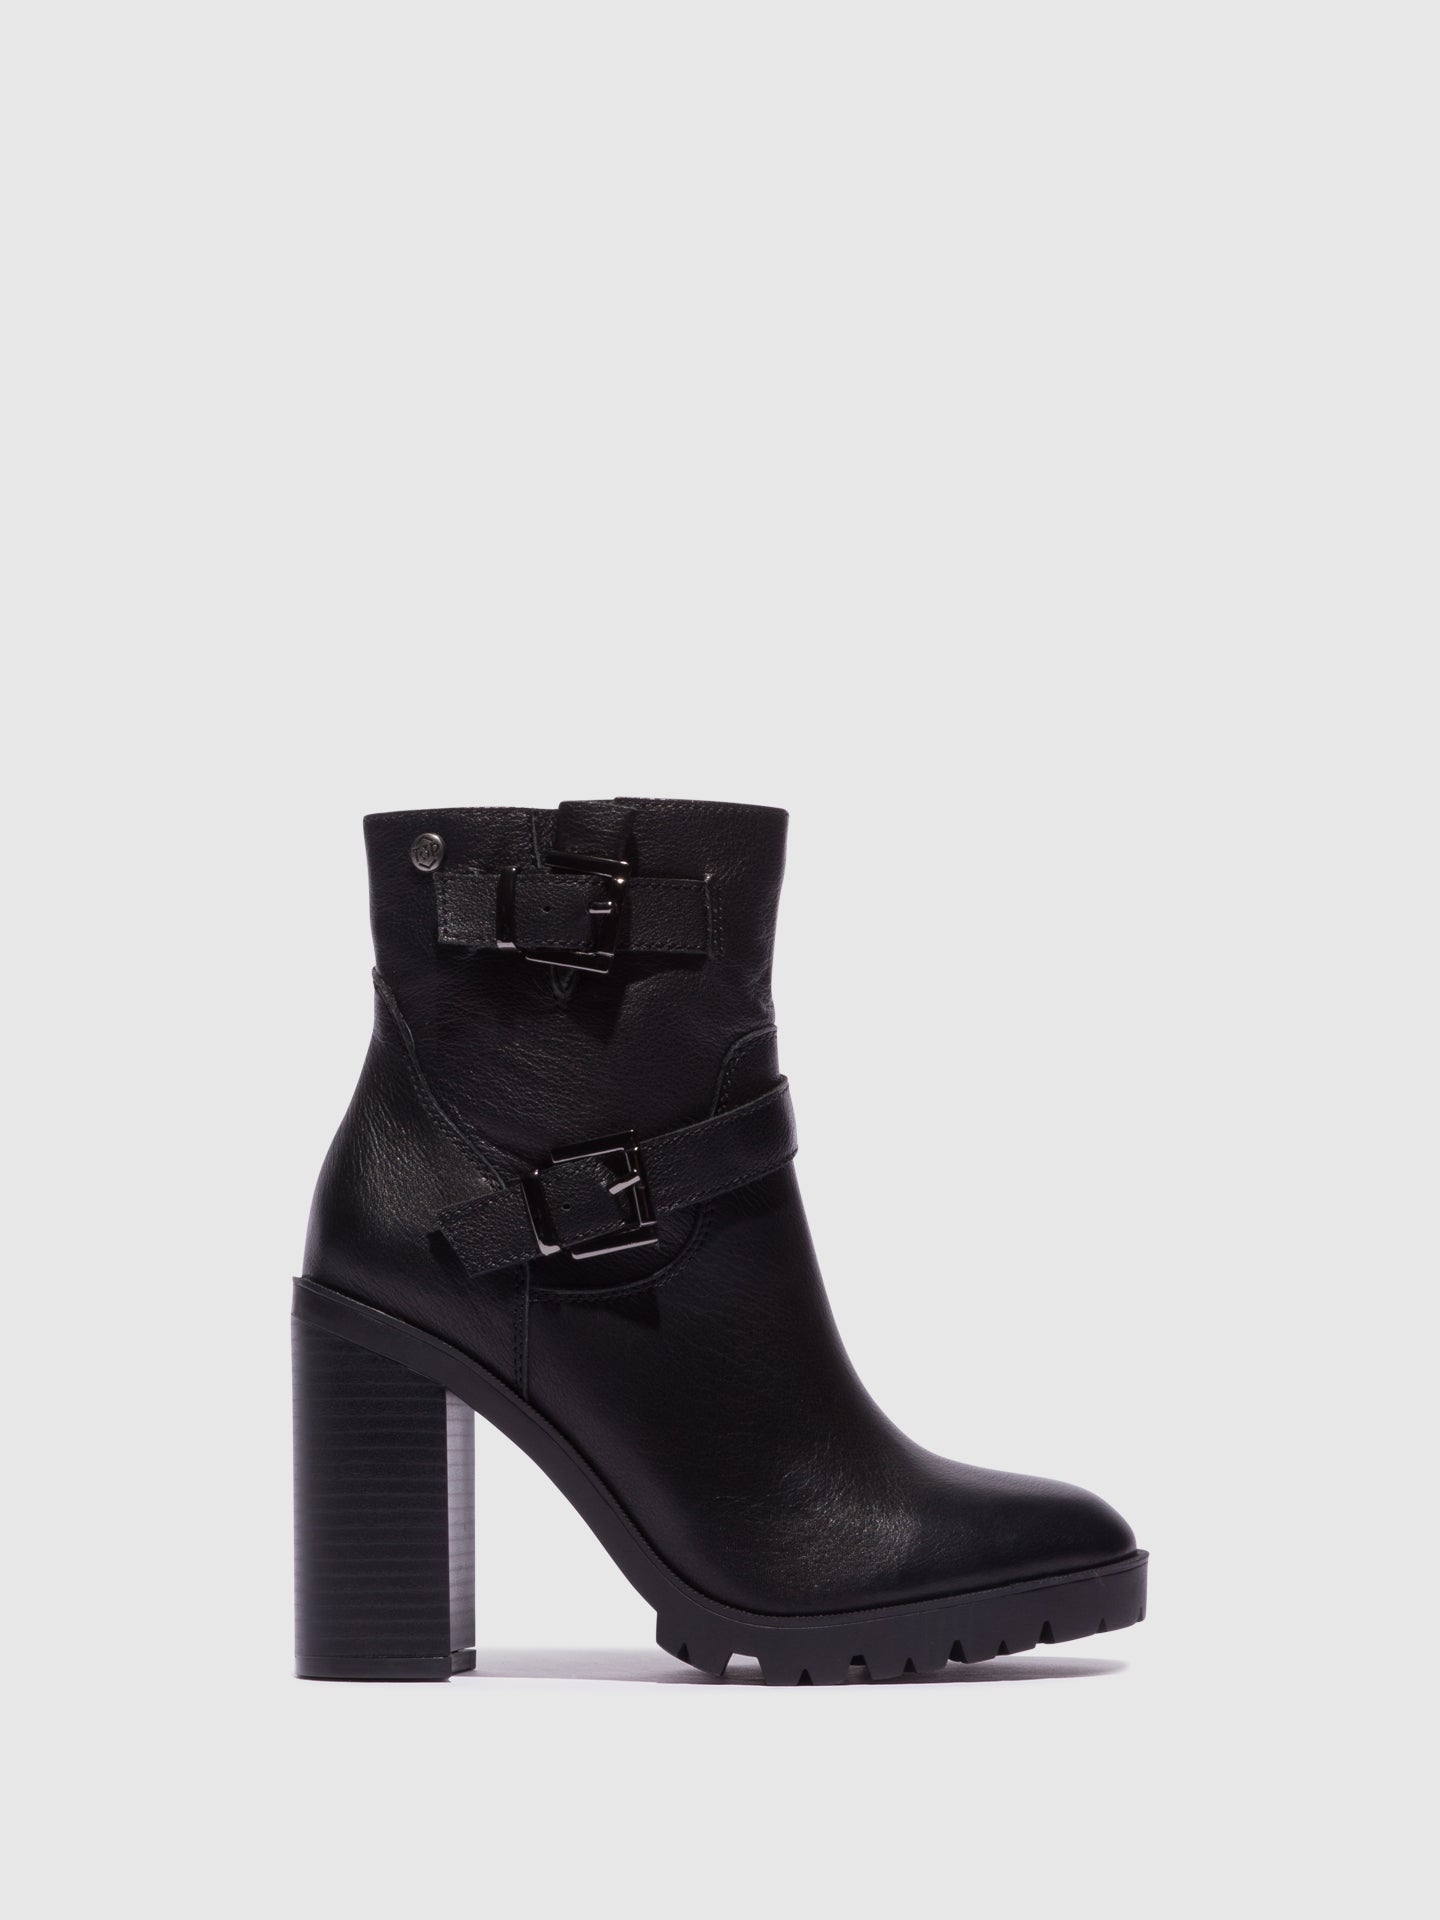 Top3 Black Buckle Ankle Boots